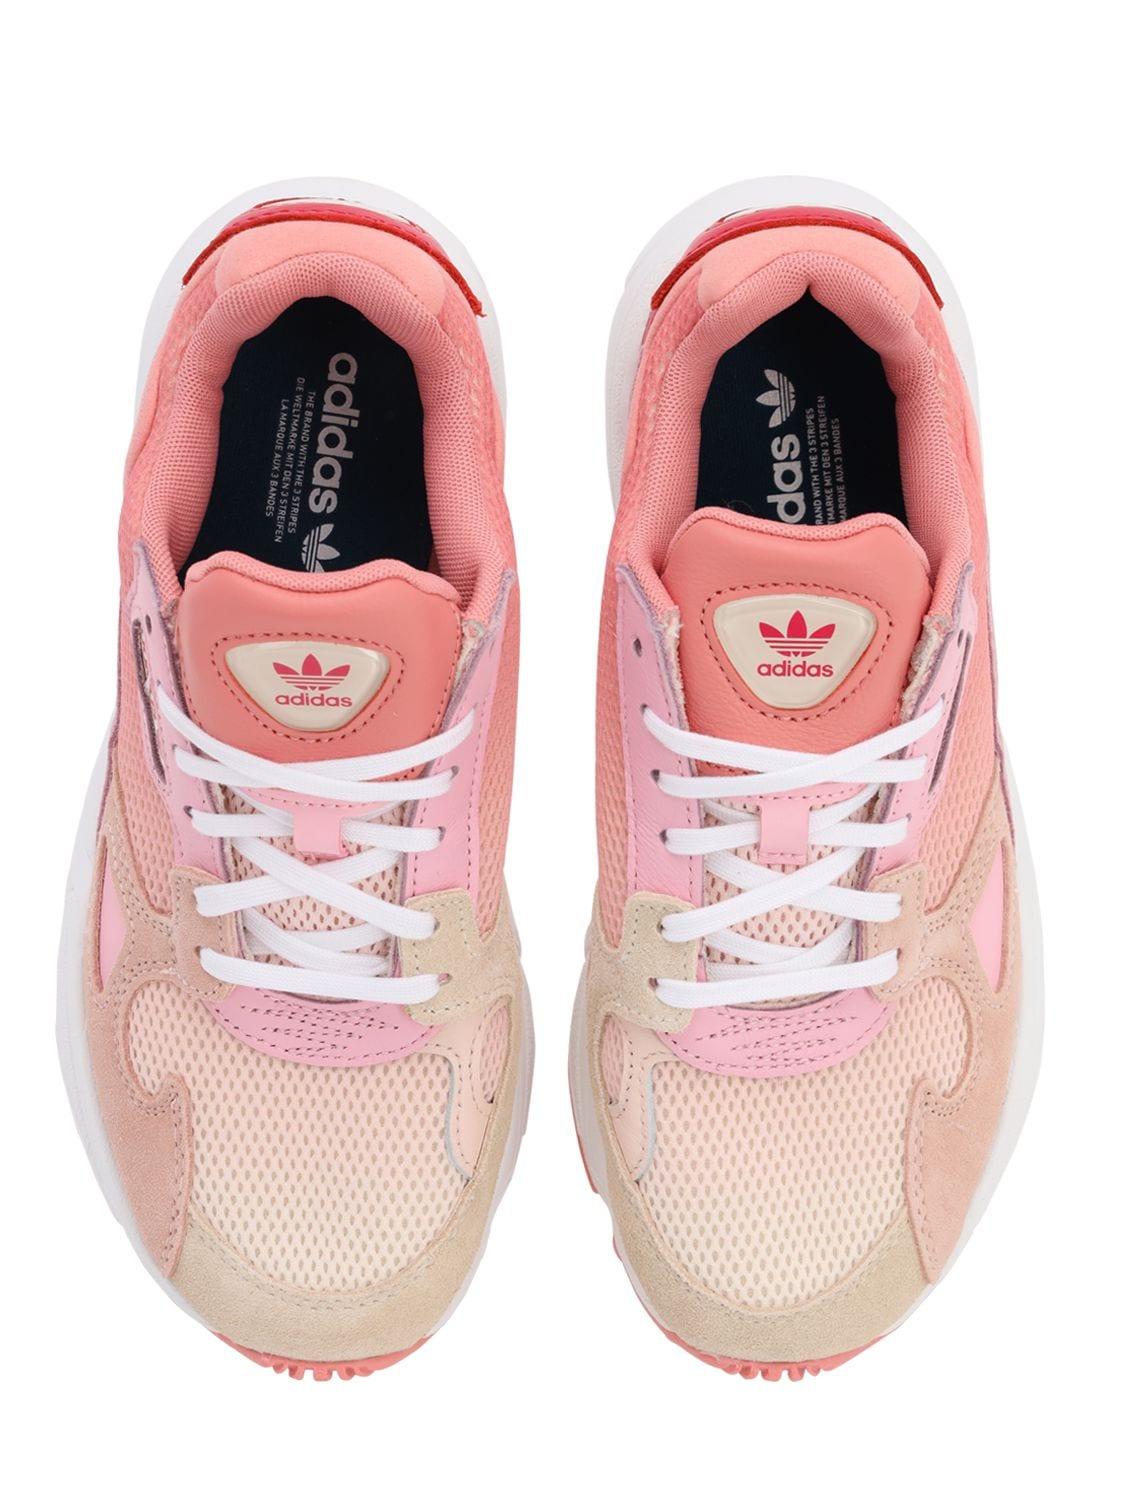 adidas Originals Leather Falcon in Peach/Peach (Pink) - Save 54% | Lyst